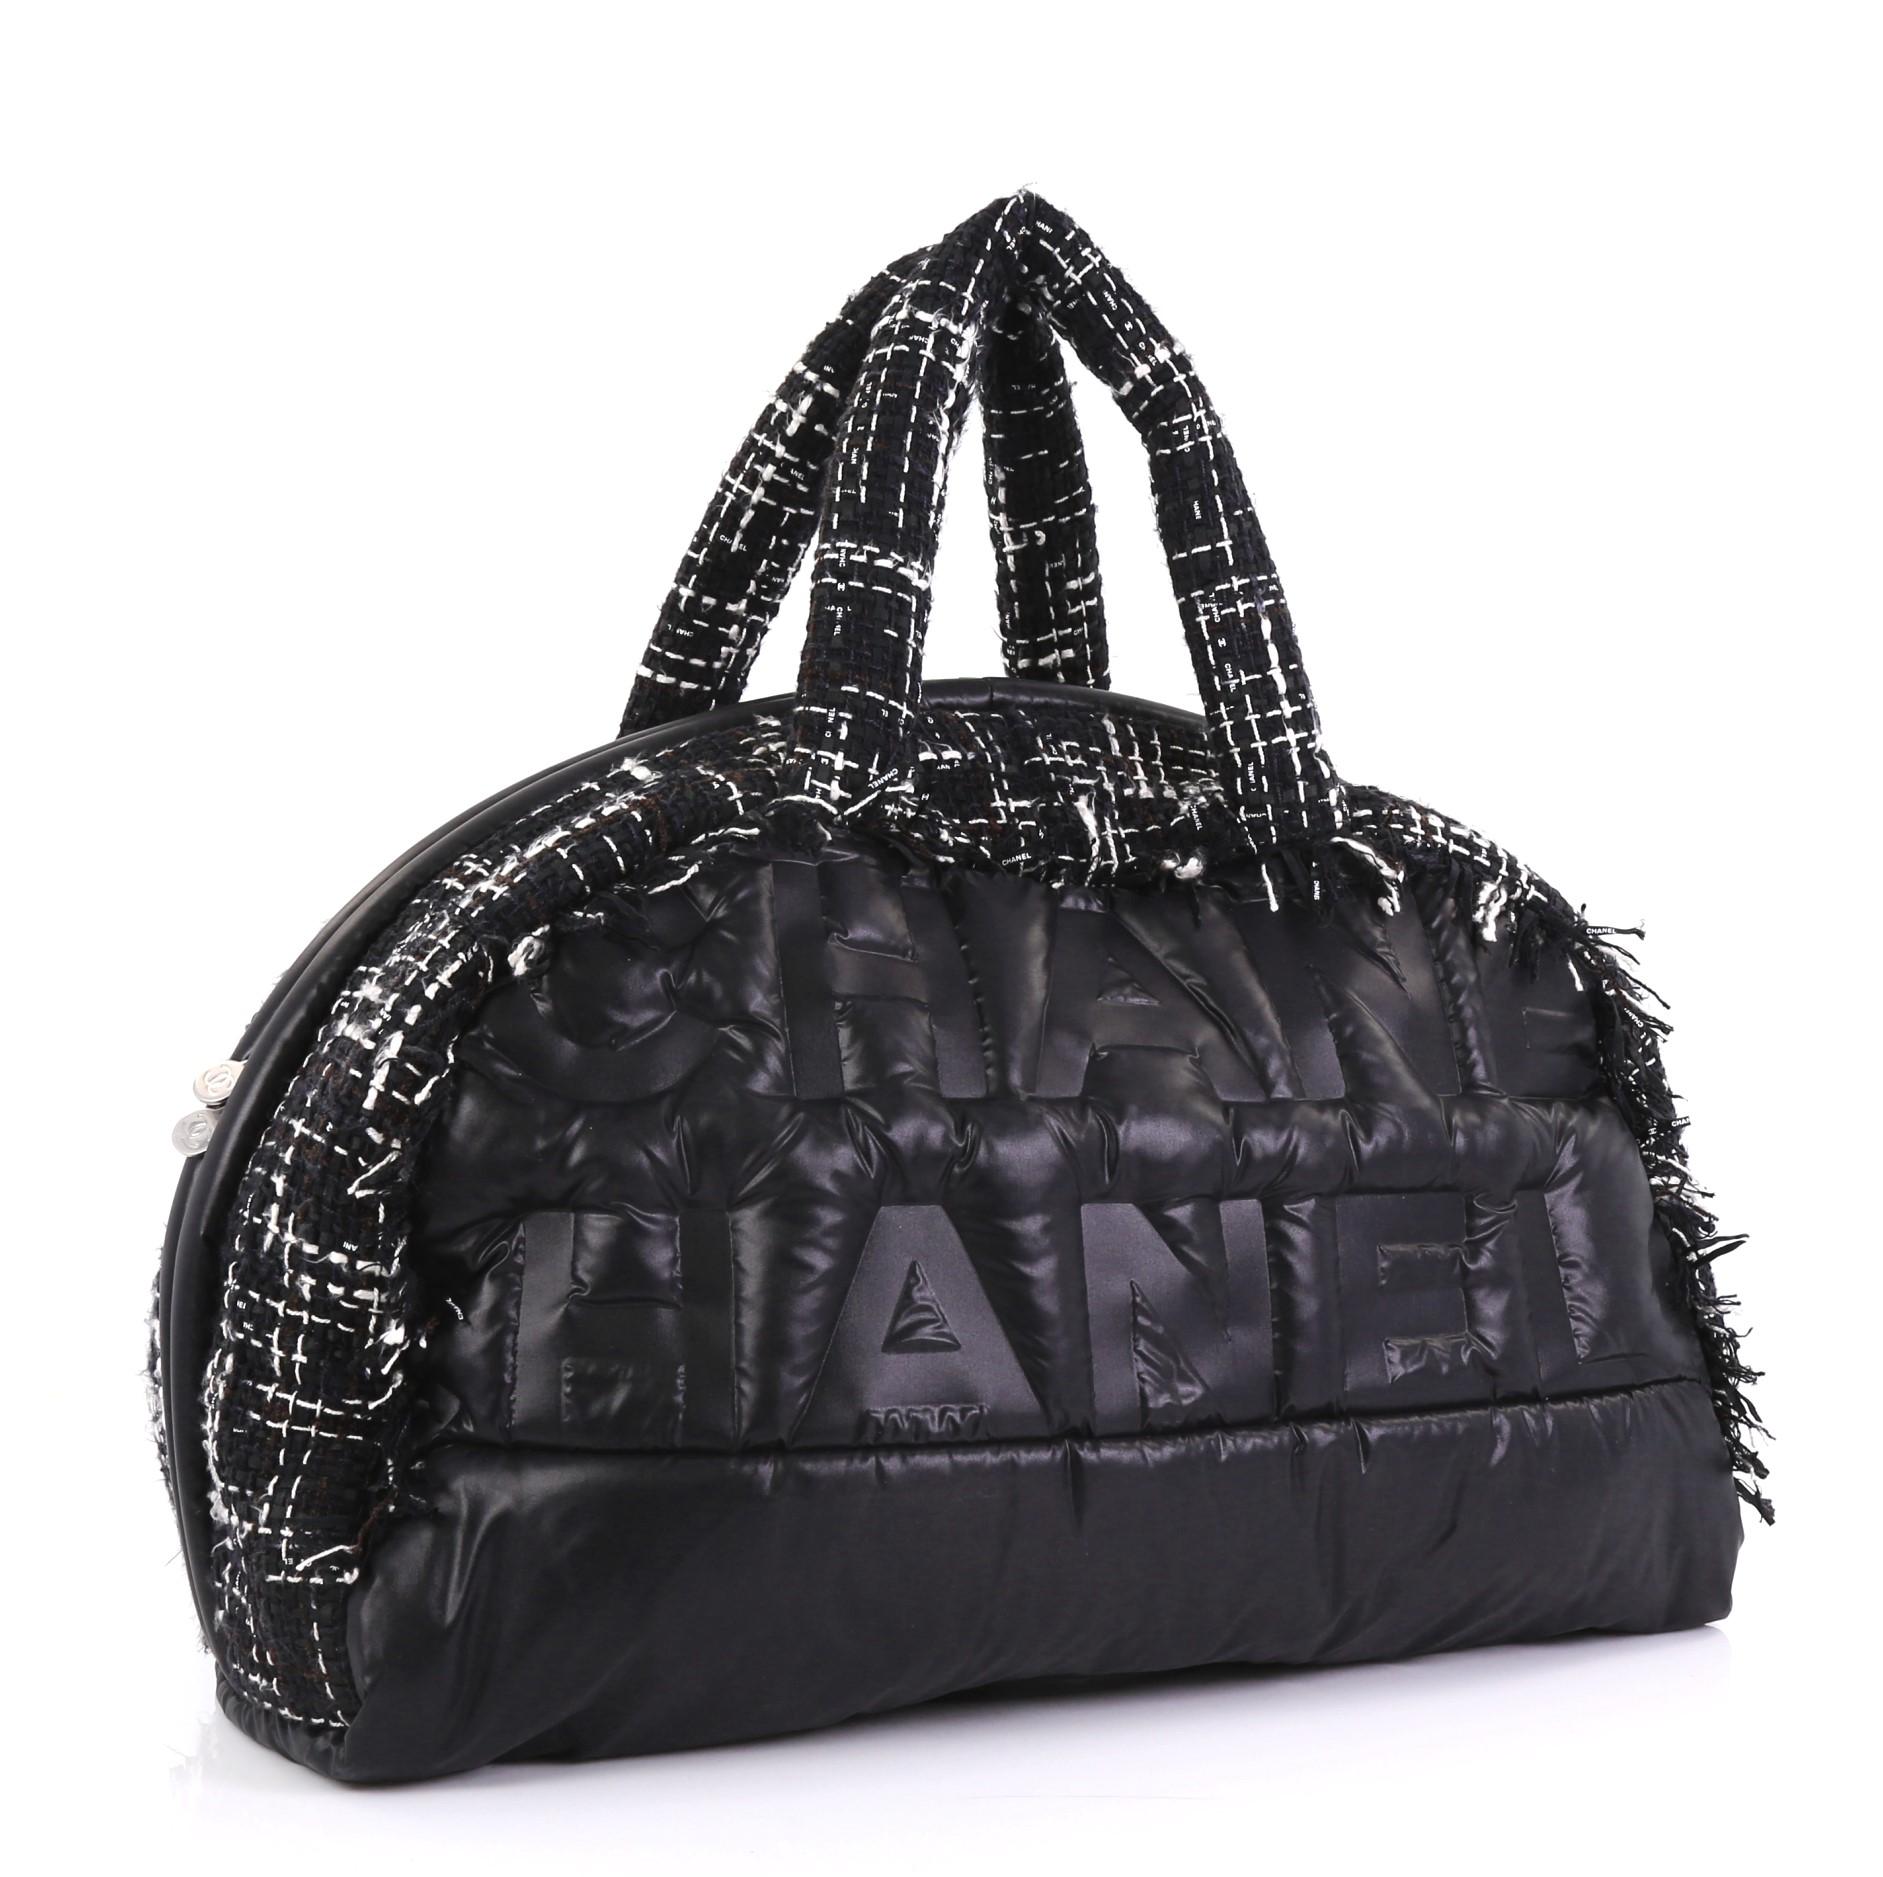 This Chanel Doudoune Bowling Bag Embossed Nylon with Tweed Large, crafted in black embossed nylon with tweed, features dual tweed handles, embossed Chanel logo and silver-tone hardware. Its zip closure opens to a black nylon interior with zip